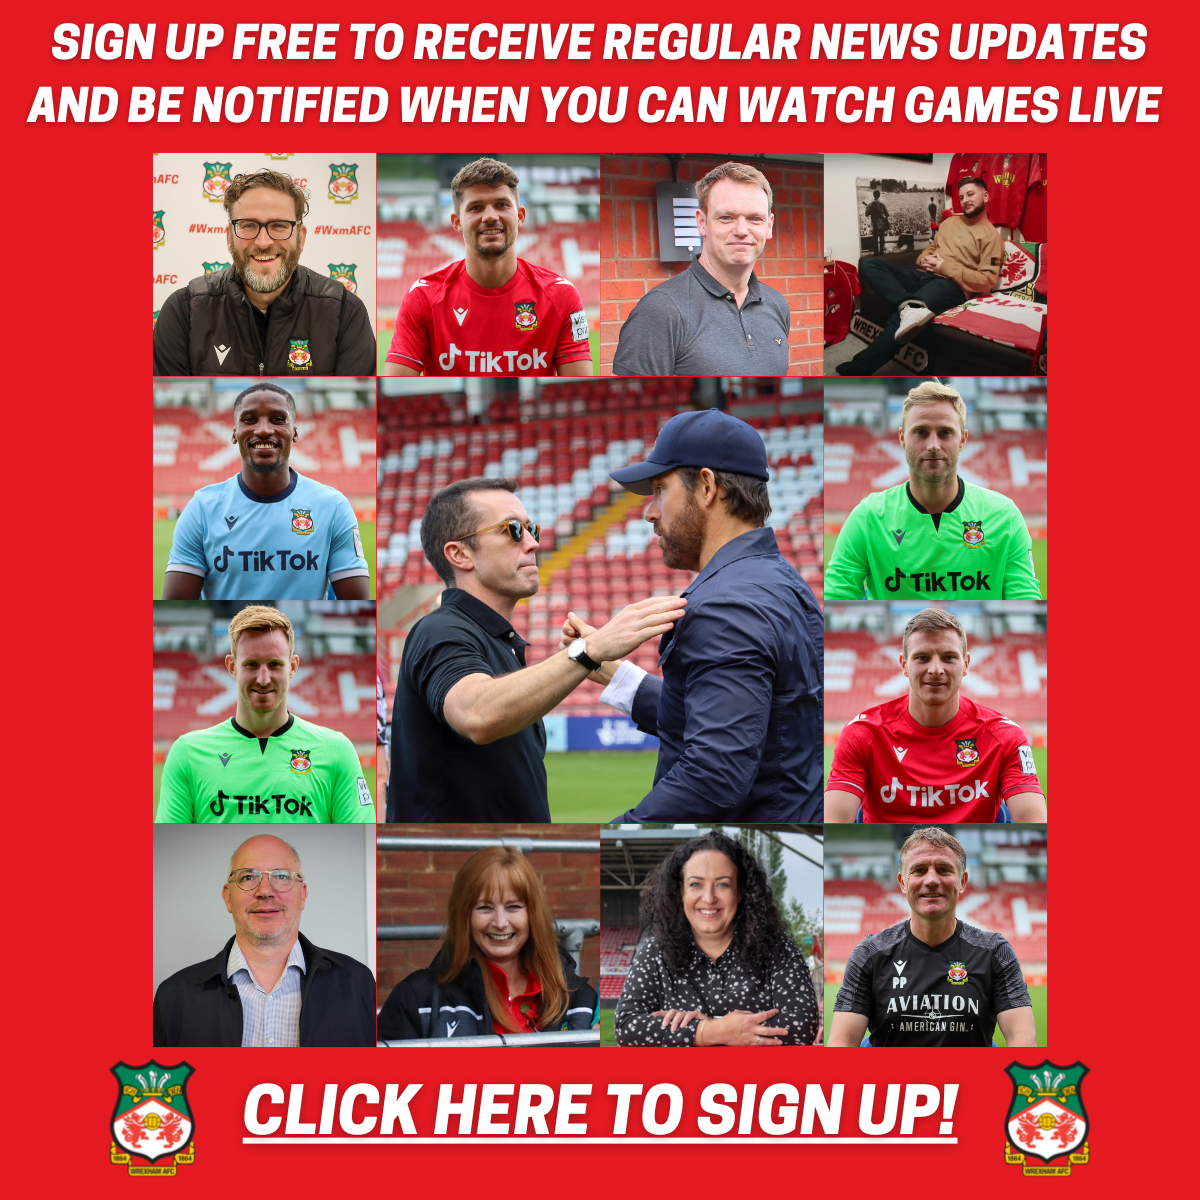 SIGN UP FREE TO RECEIVE REGULAR NEWS UPDATES AND BE NOTIFIED WHEN YOU CAN WATCH GAMES LIVE! (1).png